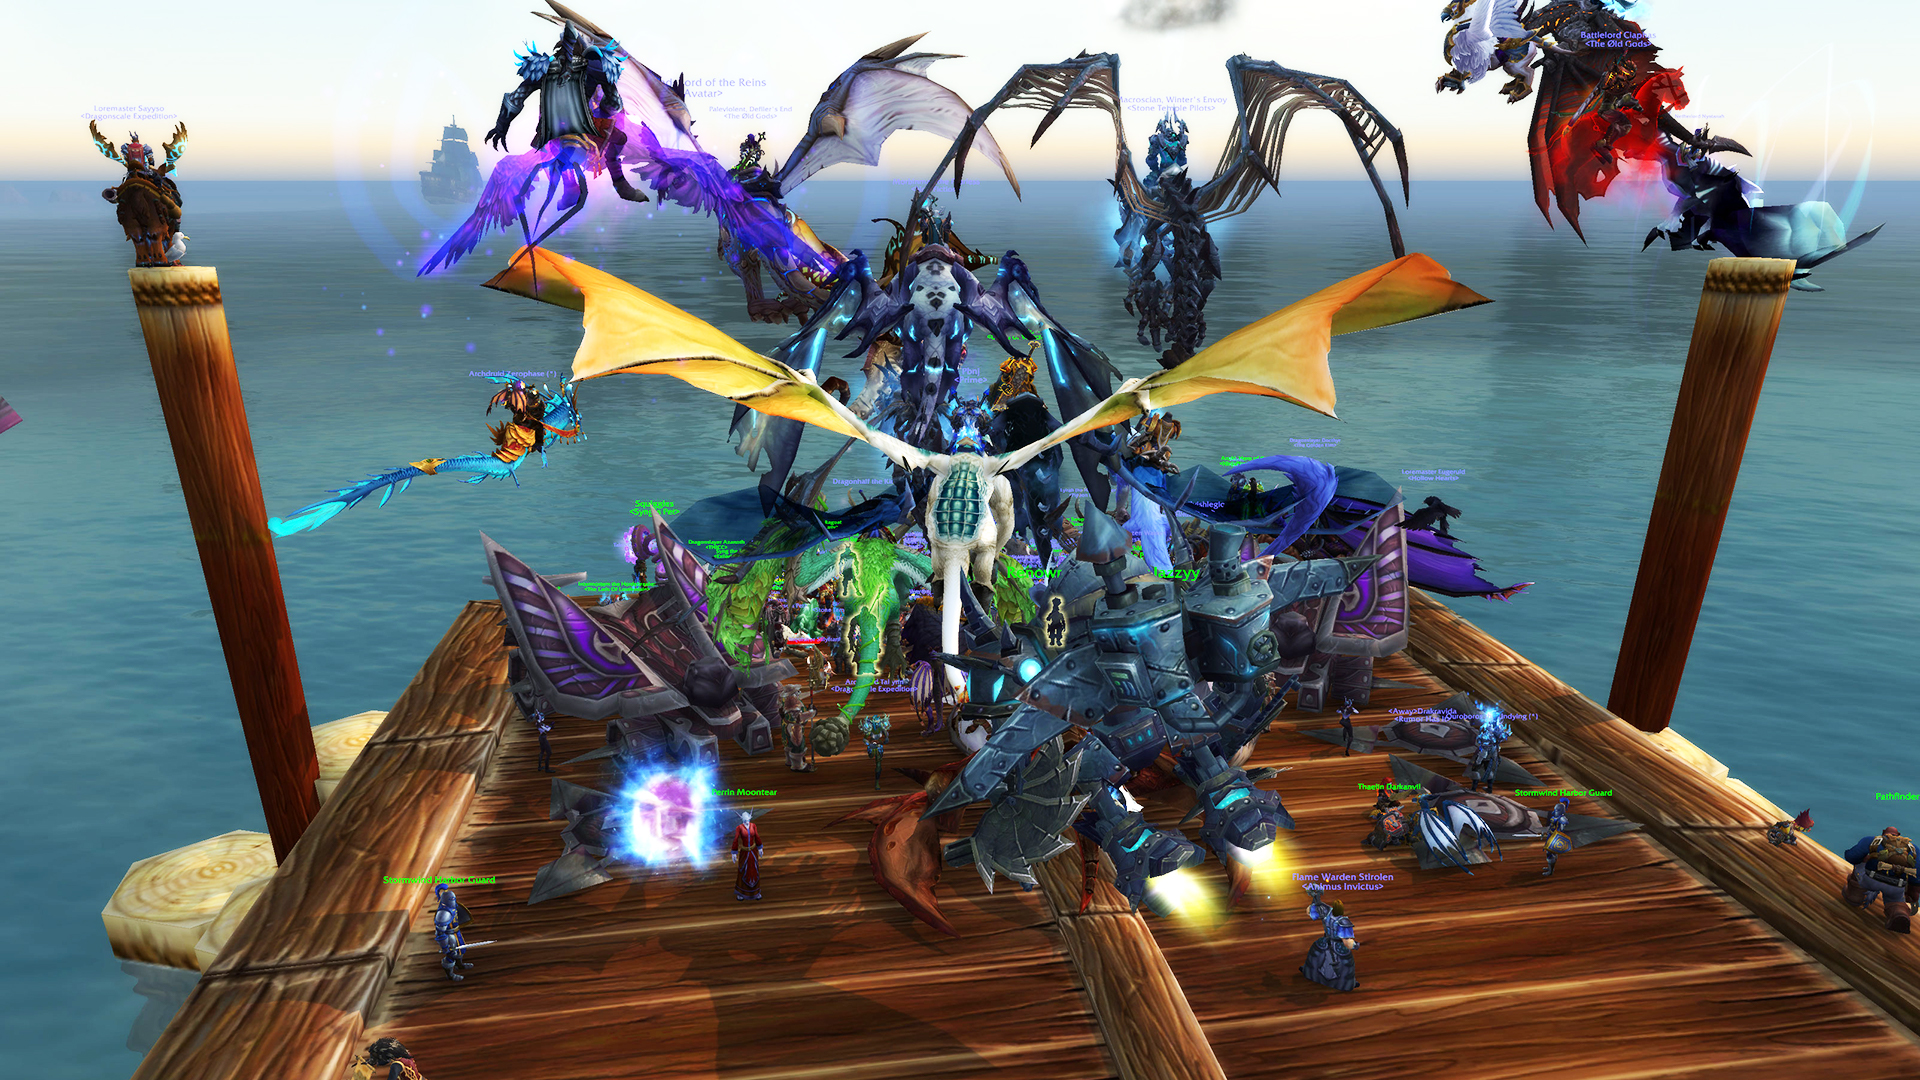 WoW: Dragonflight crowd waits for the Stormwind boat.